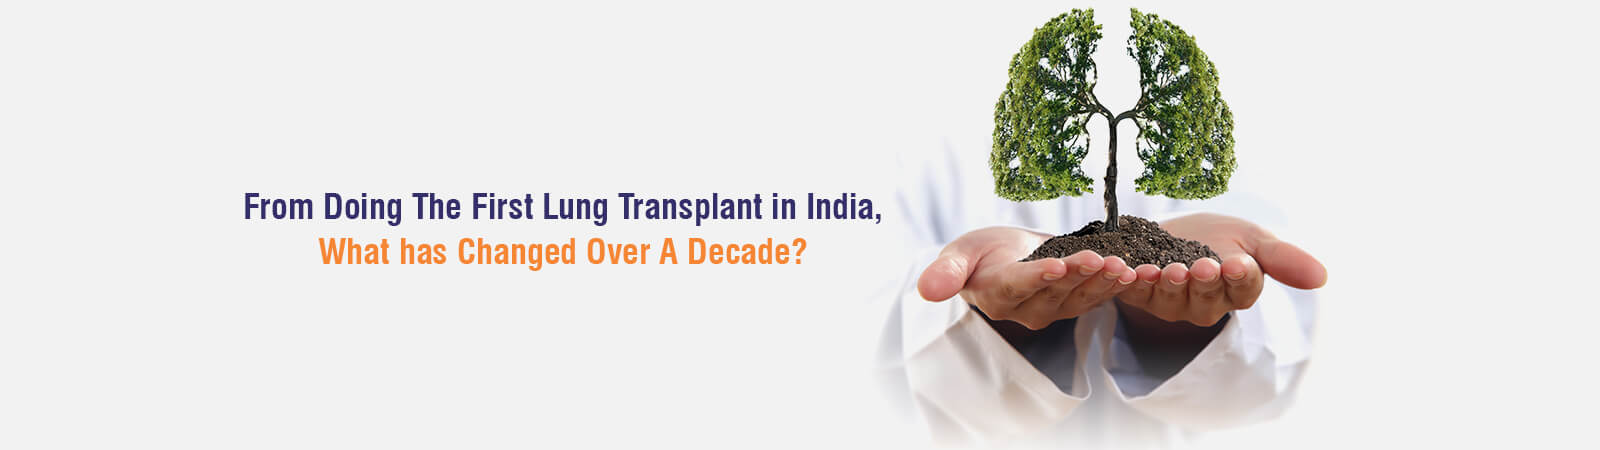 The First Lung Transplant in India